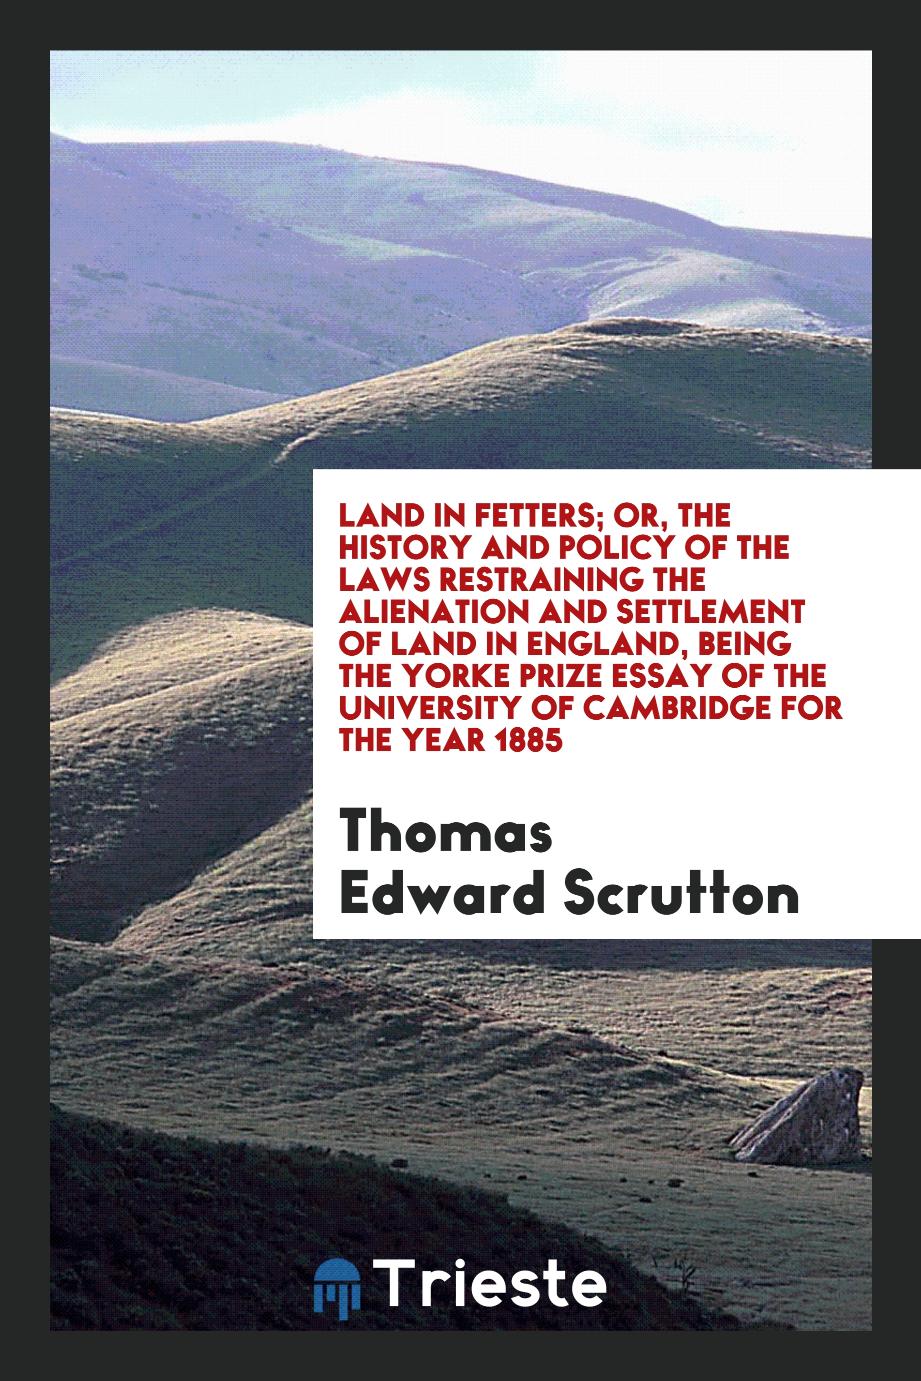 Land in fetters; or, The history and policy of the laws restraining the alienation and settlement of land in England, being the Yorke prize essay of the University of Cambridge for the year 1885